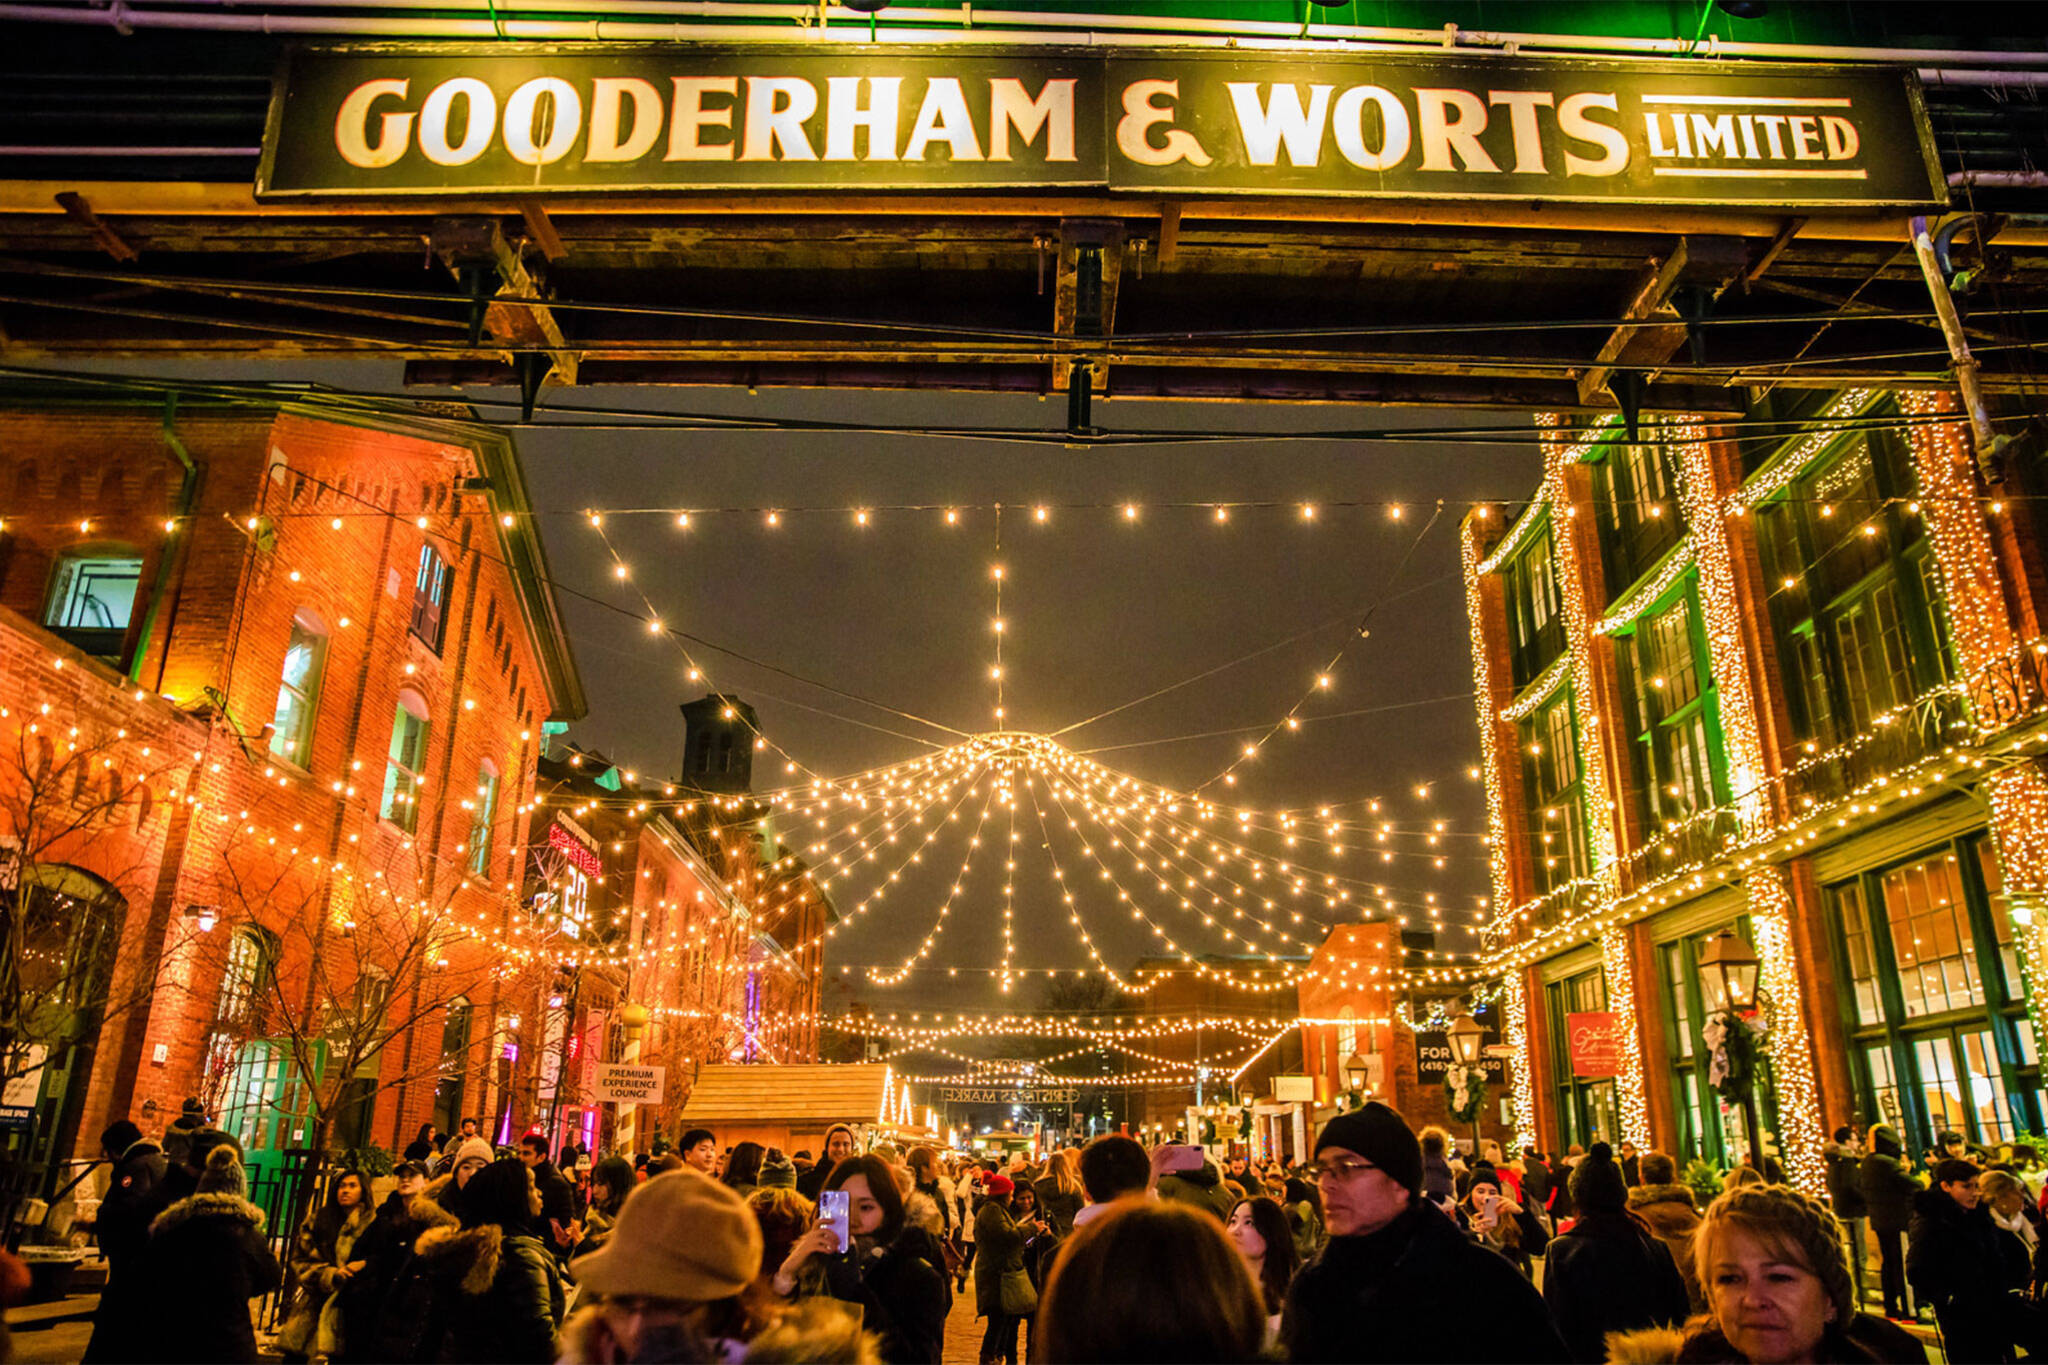 The Toronto Christmas Market is officially coming back this year